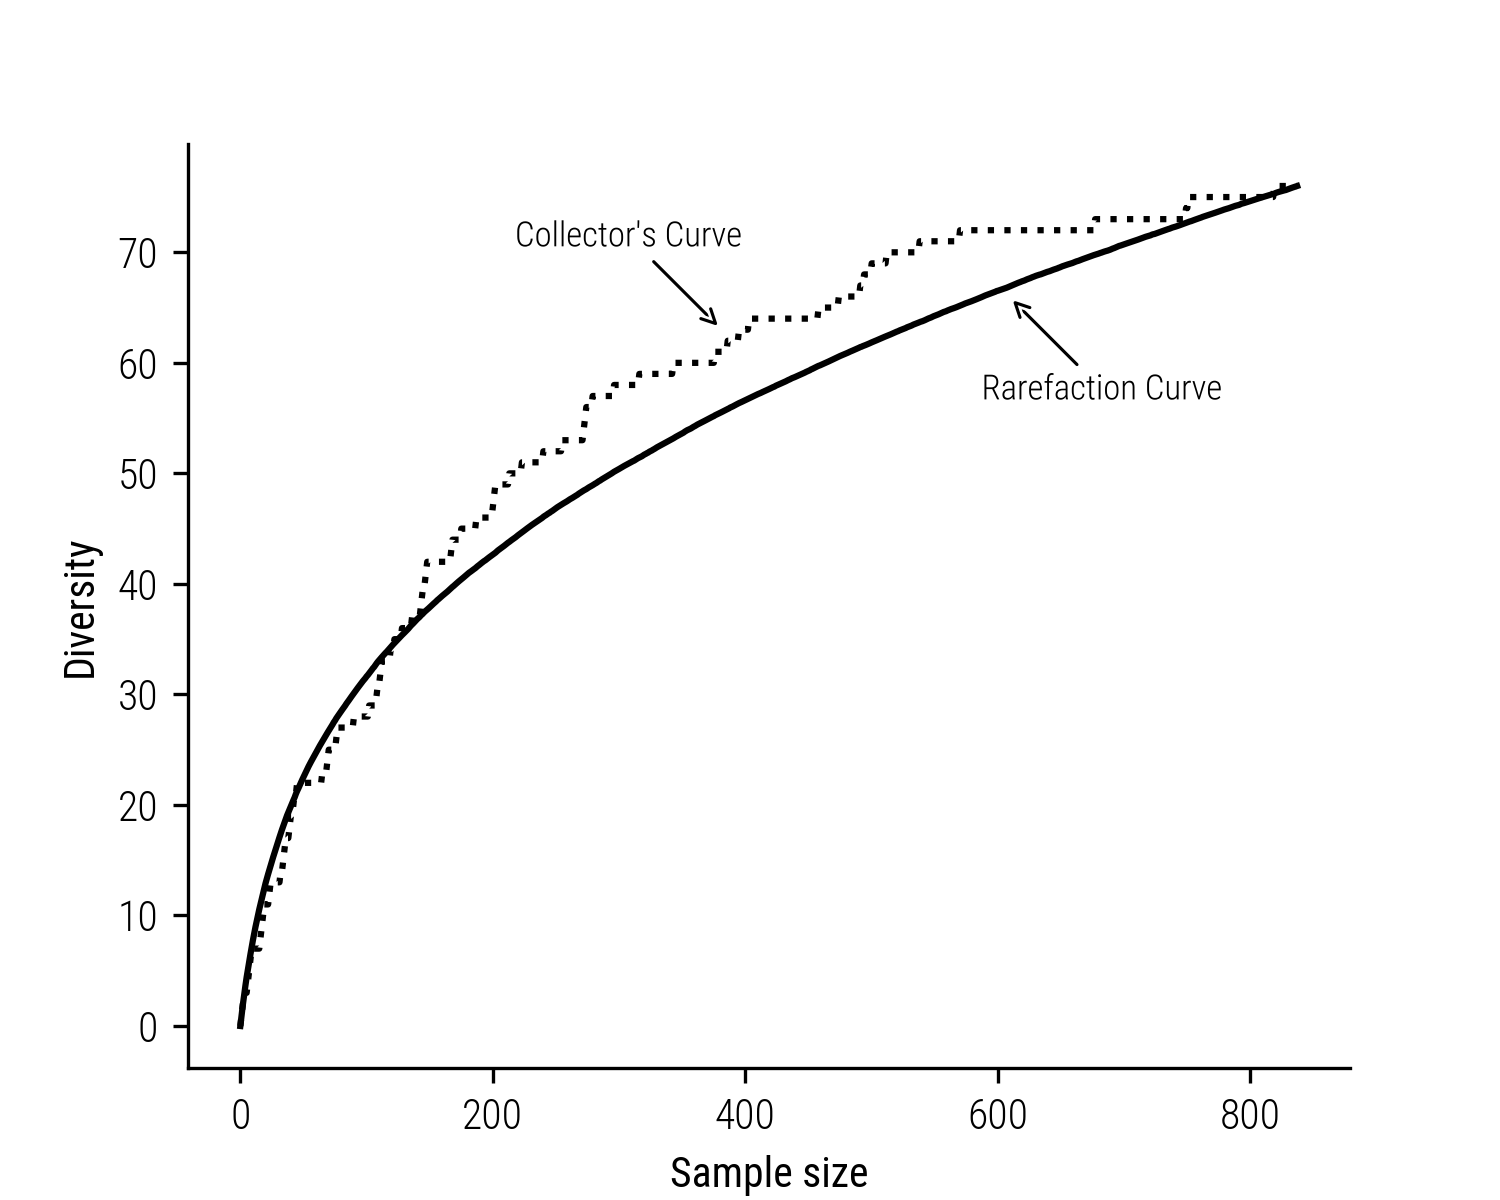 Figure 3: Fictional collector&rsquo;s curve and its corresponding rarefaction curve.